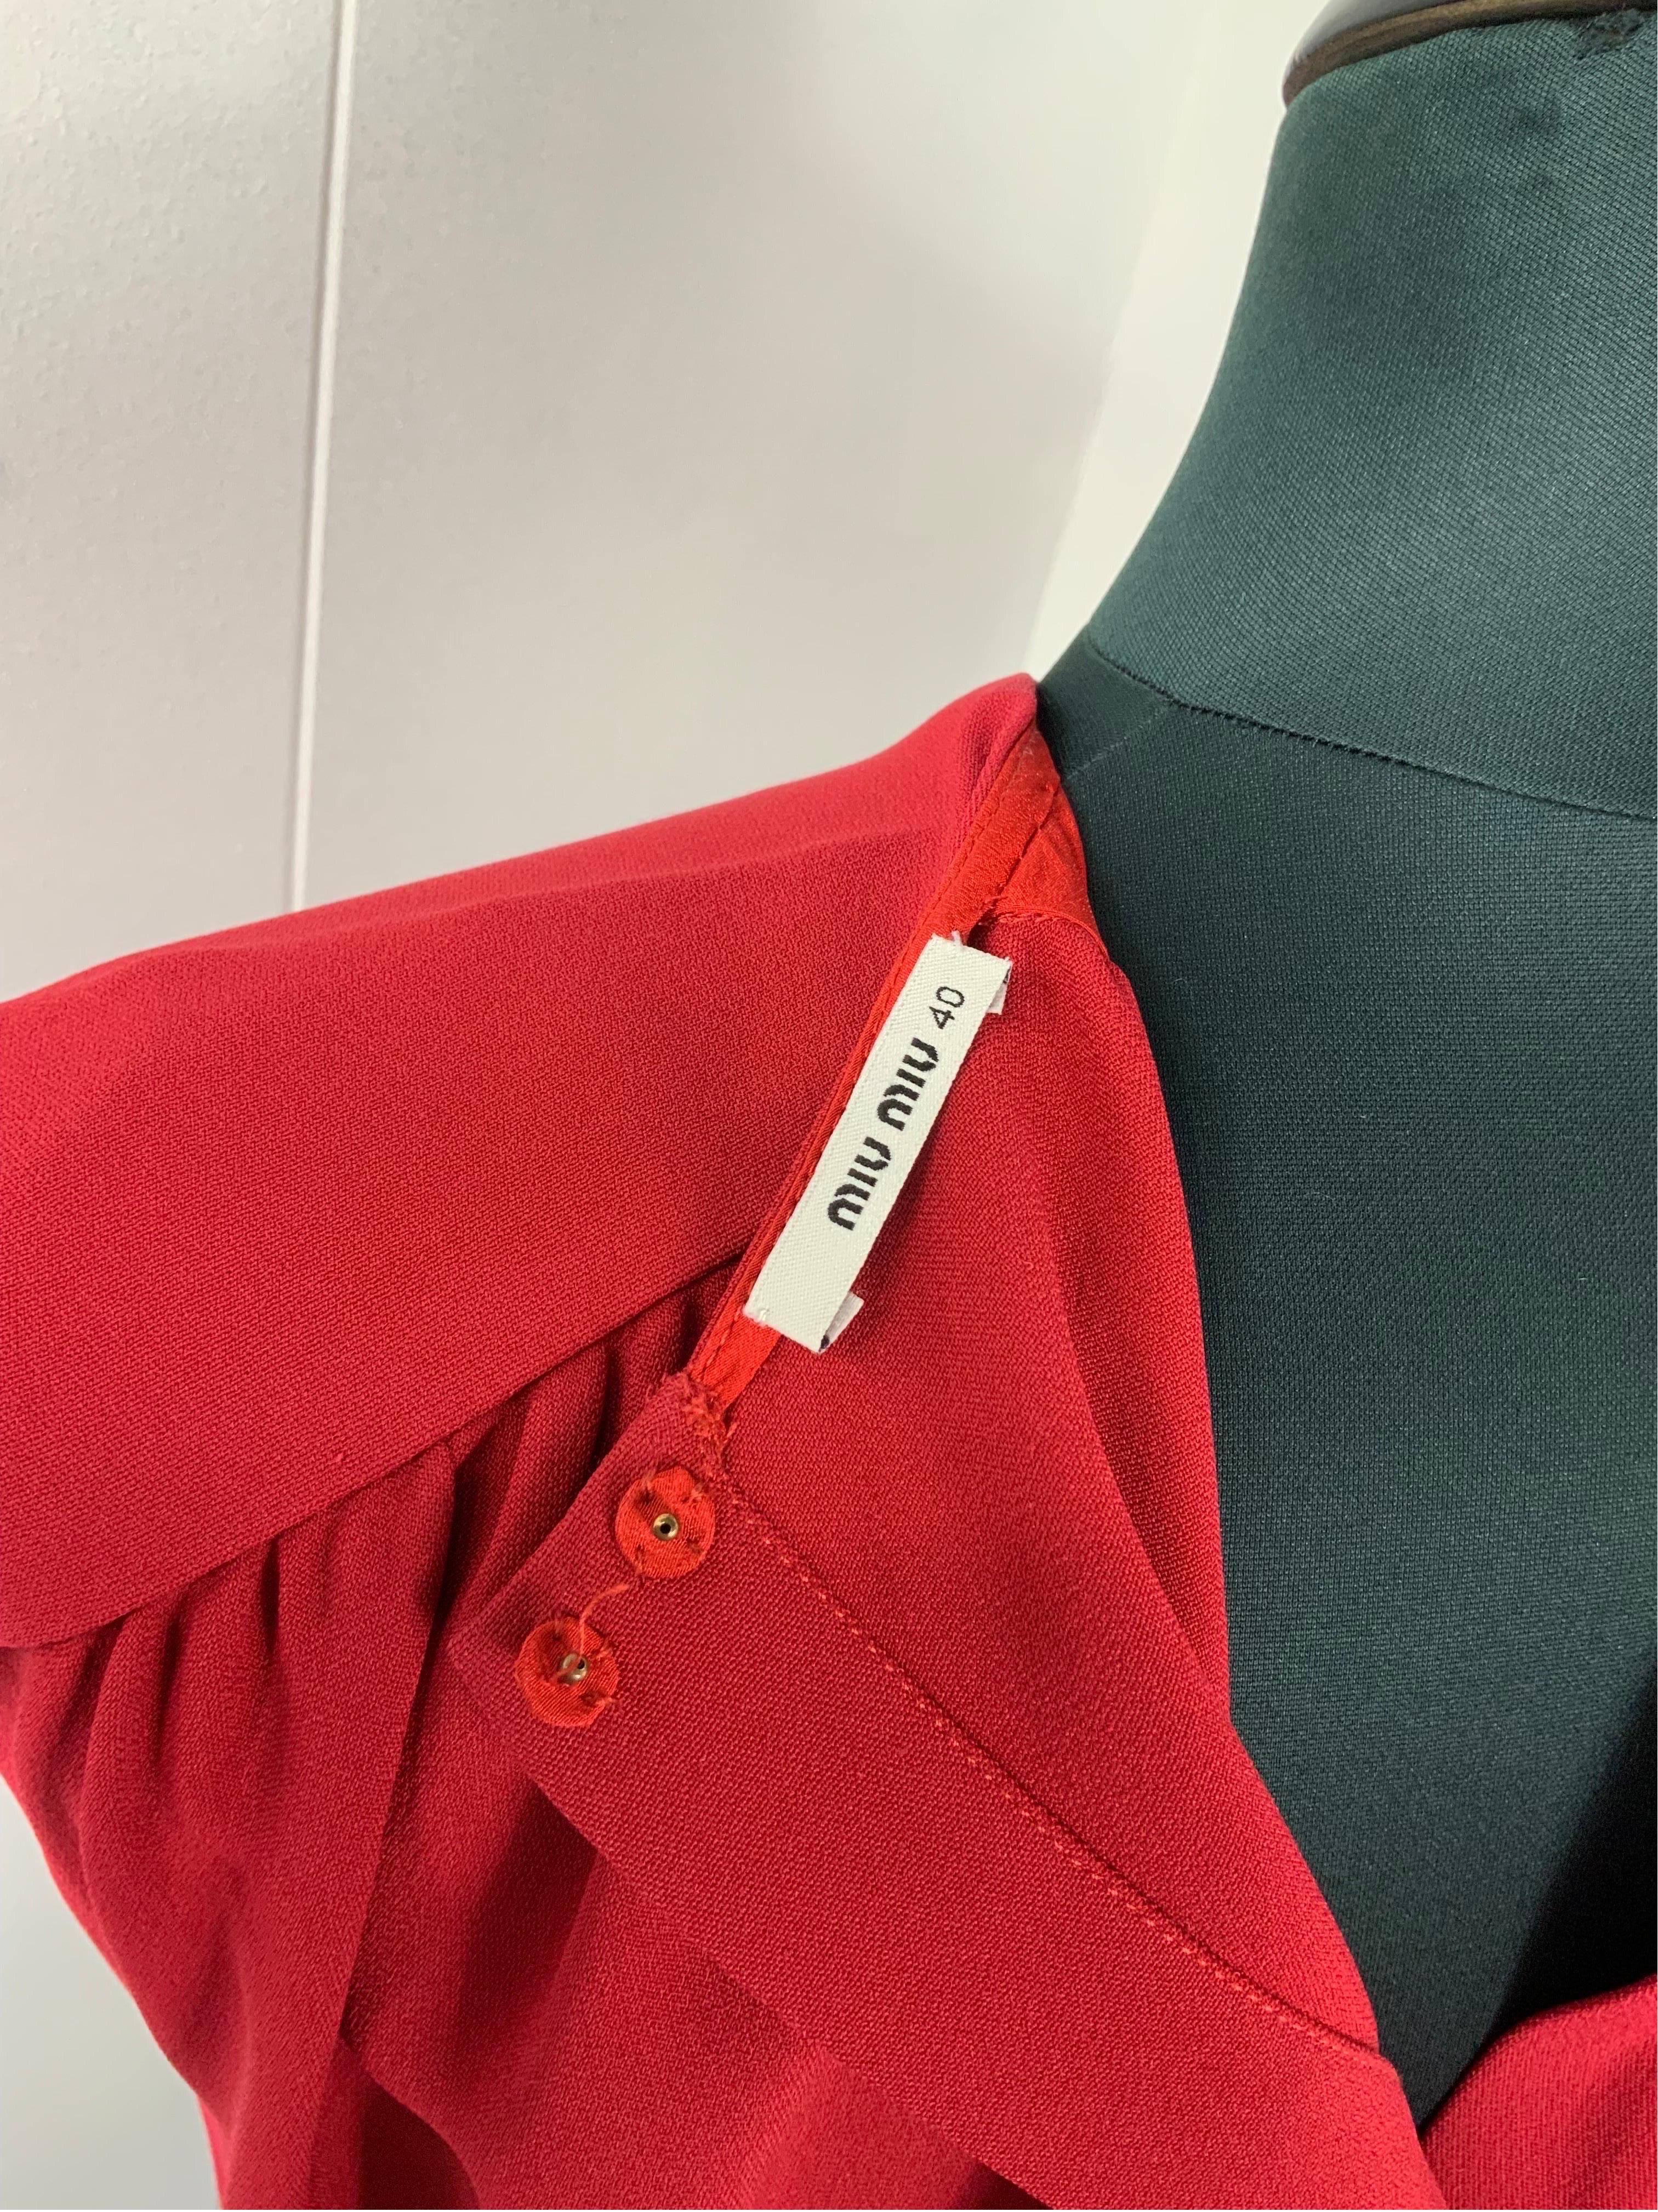 MIUMIU bicolor red and blue Dress For Sale 4